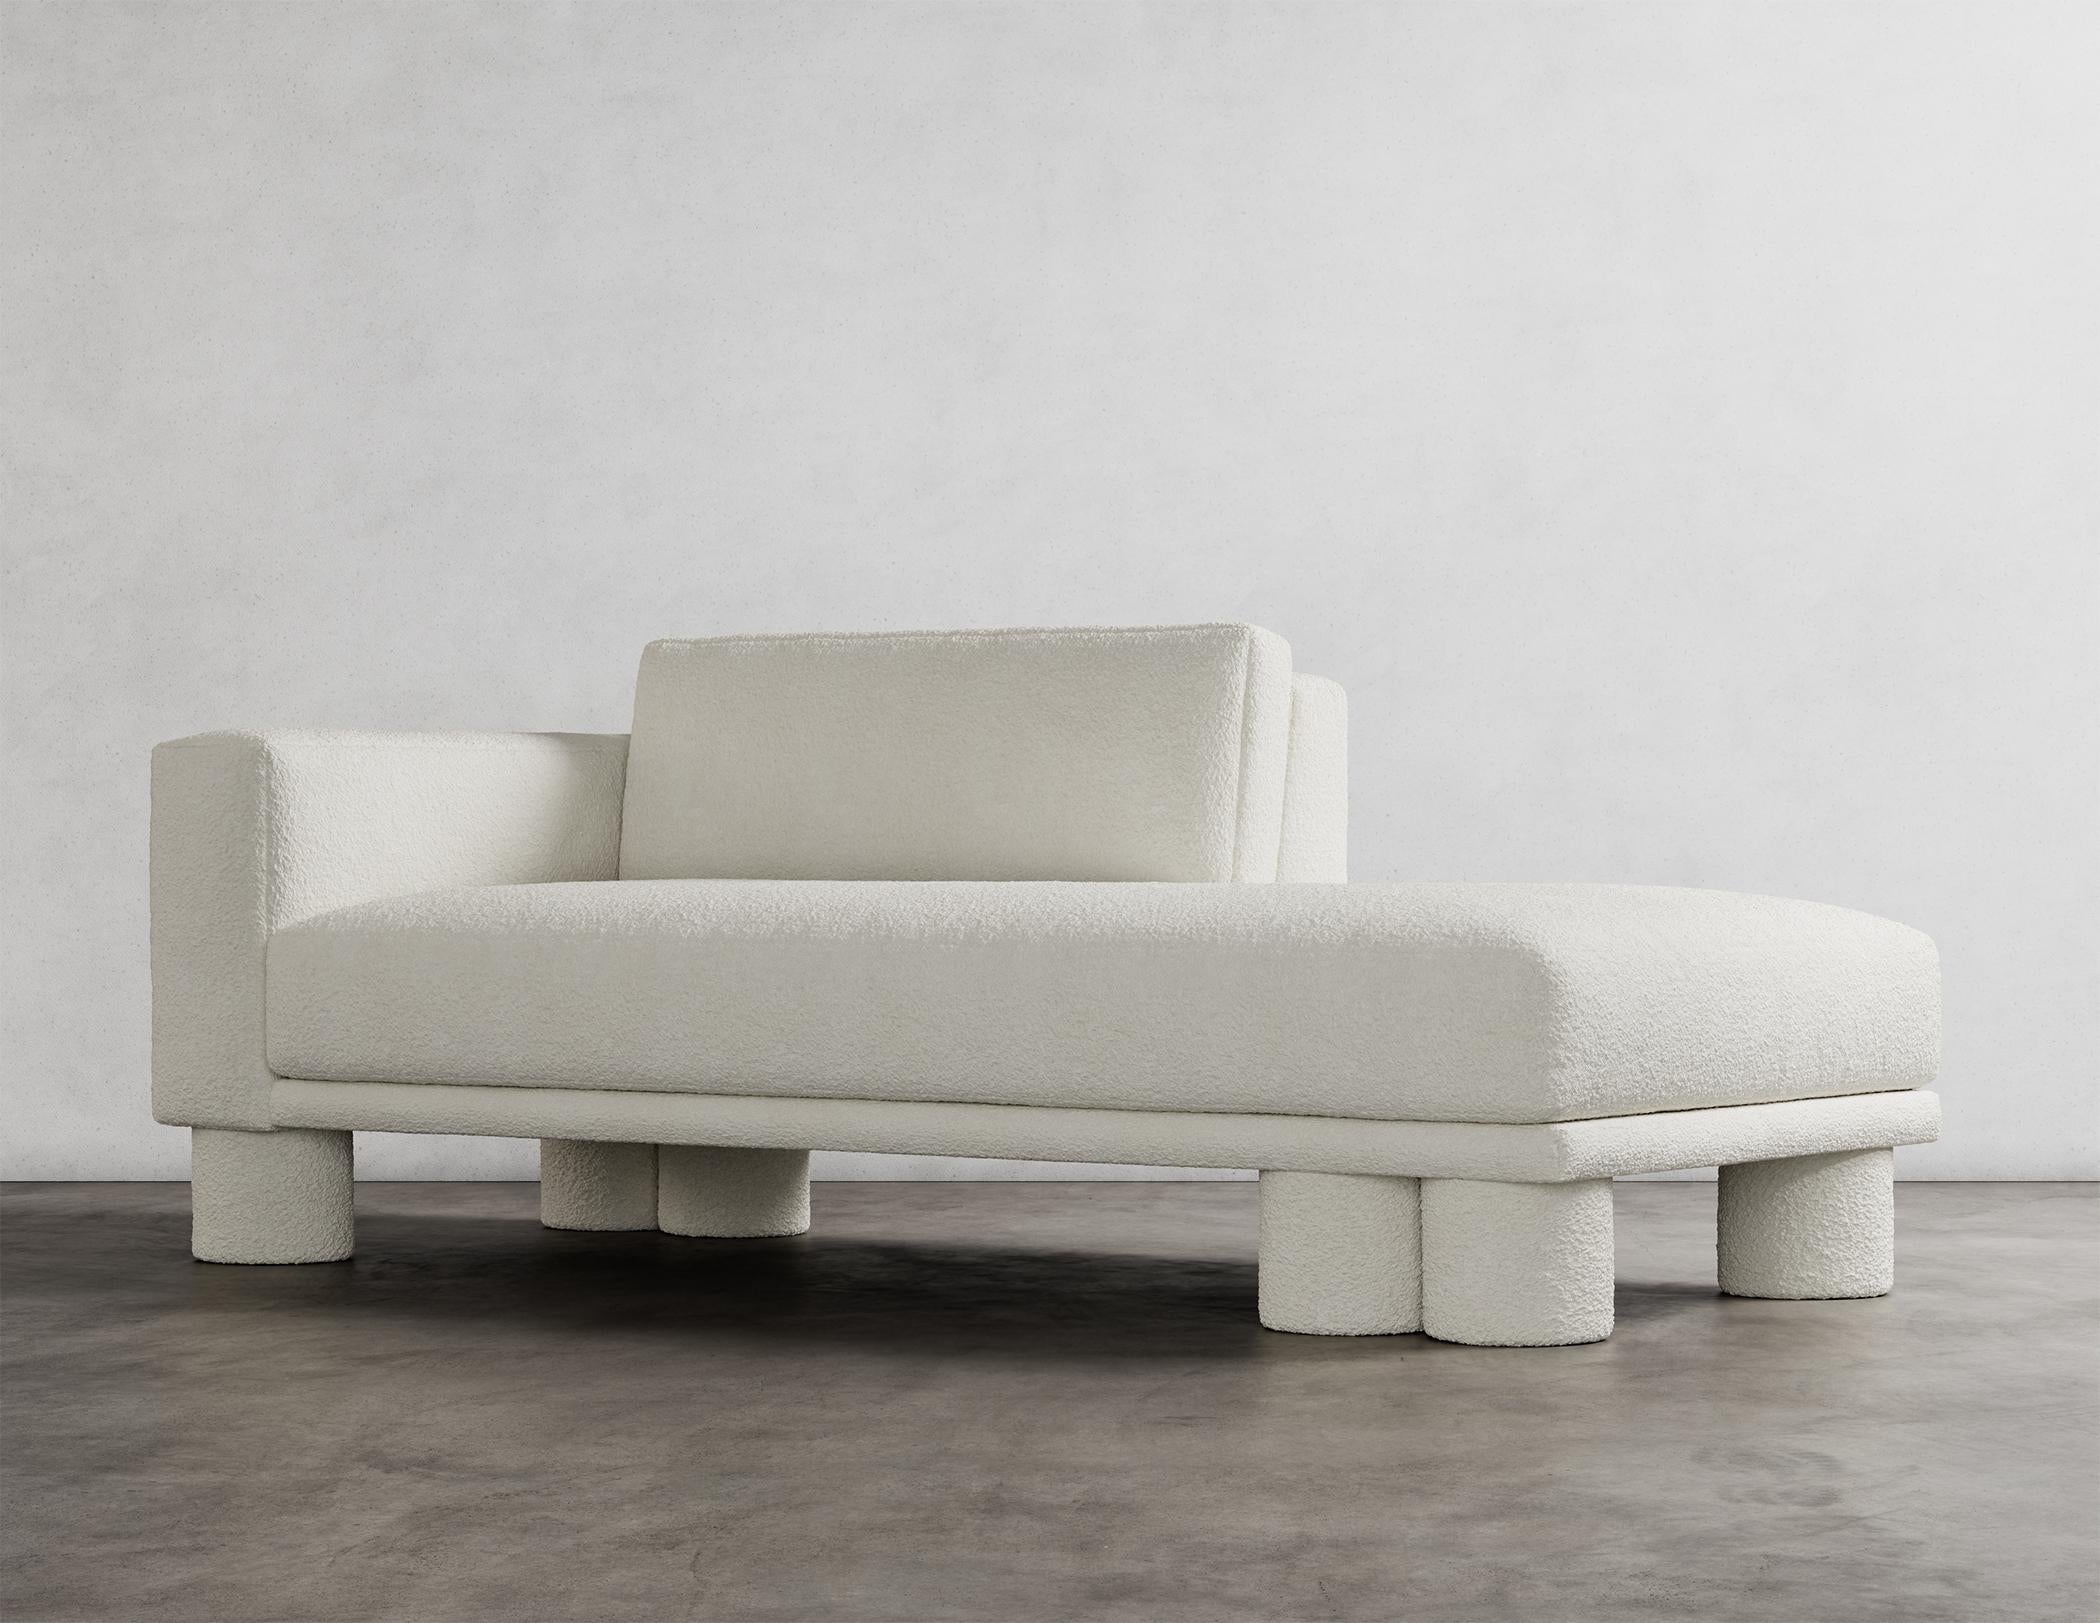 The Pillar Chaise is a stunning piece of furniture with a unique and captivating design. It is characterized by layered, asymmetrical design elements that create a sense of sophistication and simplicity. The deliberate imbalance in these design